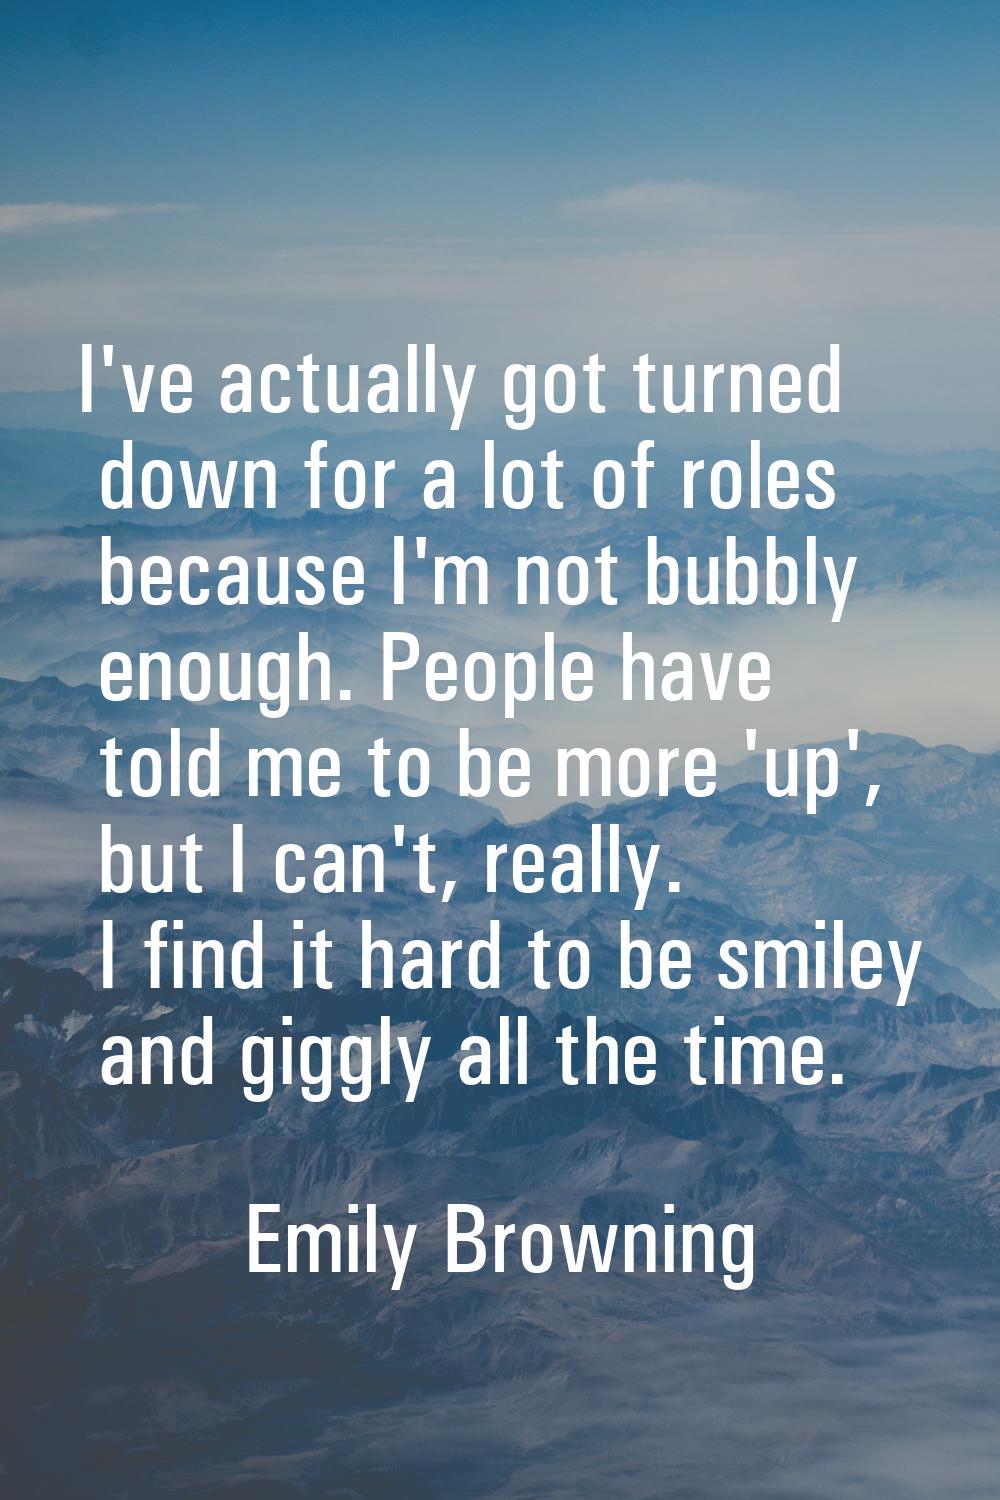 I've actually got turned down for a lot of roles because I'm not bubbly enough. People have told me